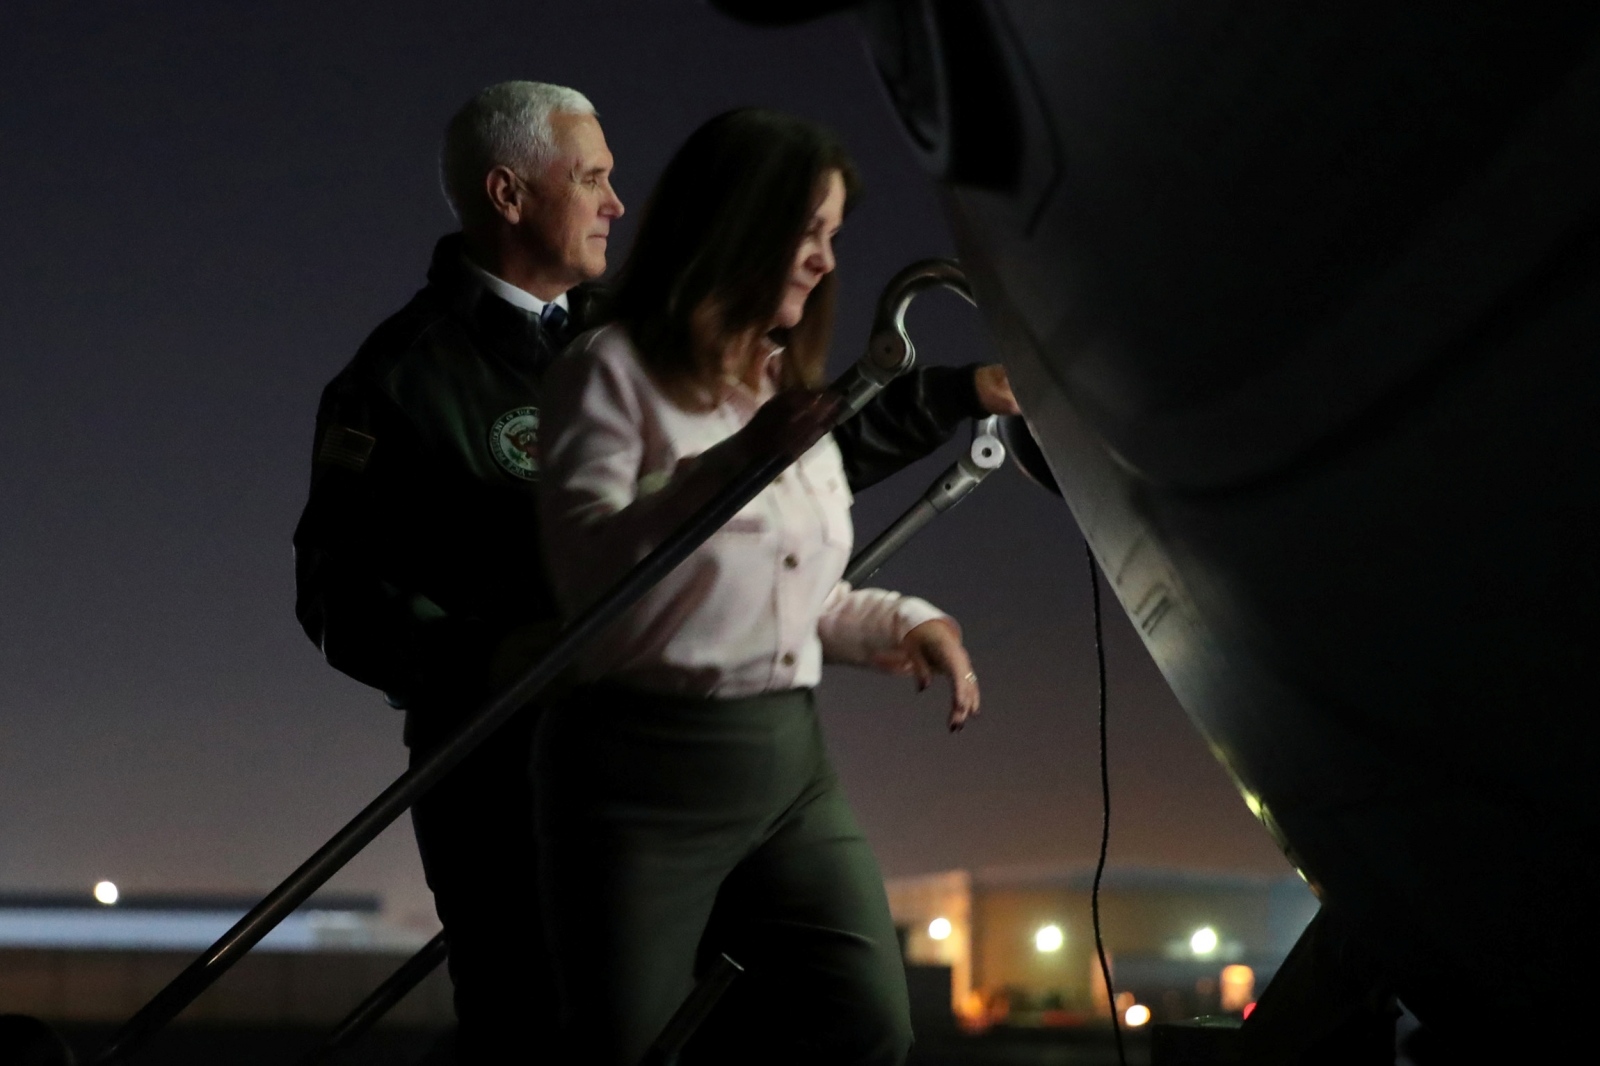 U.S. Vice President Pence and his wife board their U.S. military transport to depart Erbil International Airport in Erbil, Iraq U.S. ‪Vice President Mike Pence‬ and his wife Karen Pence board their U.S. military transport to depart Erbil International Airport in Erbil, Iraq November 23, 2019. REUTERS/Jonathan Ernst JONATHAN ERNST